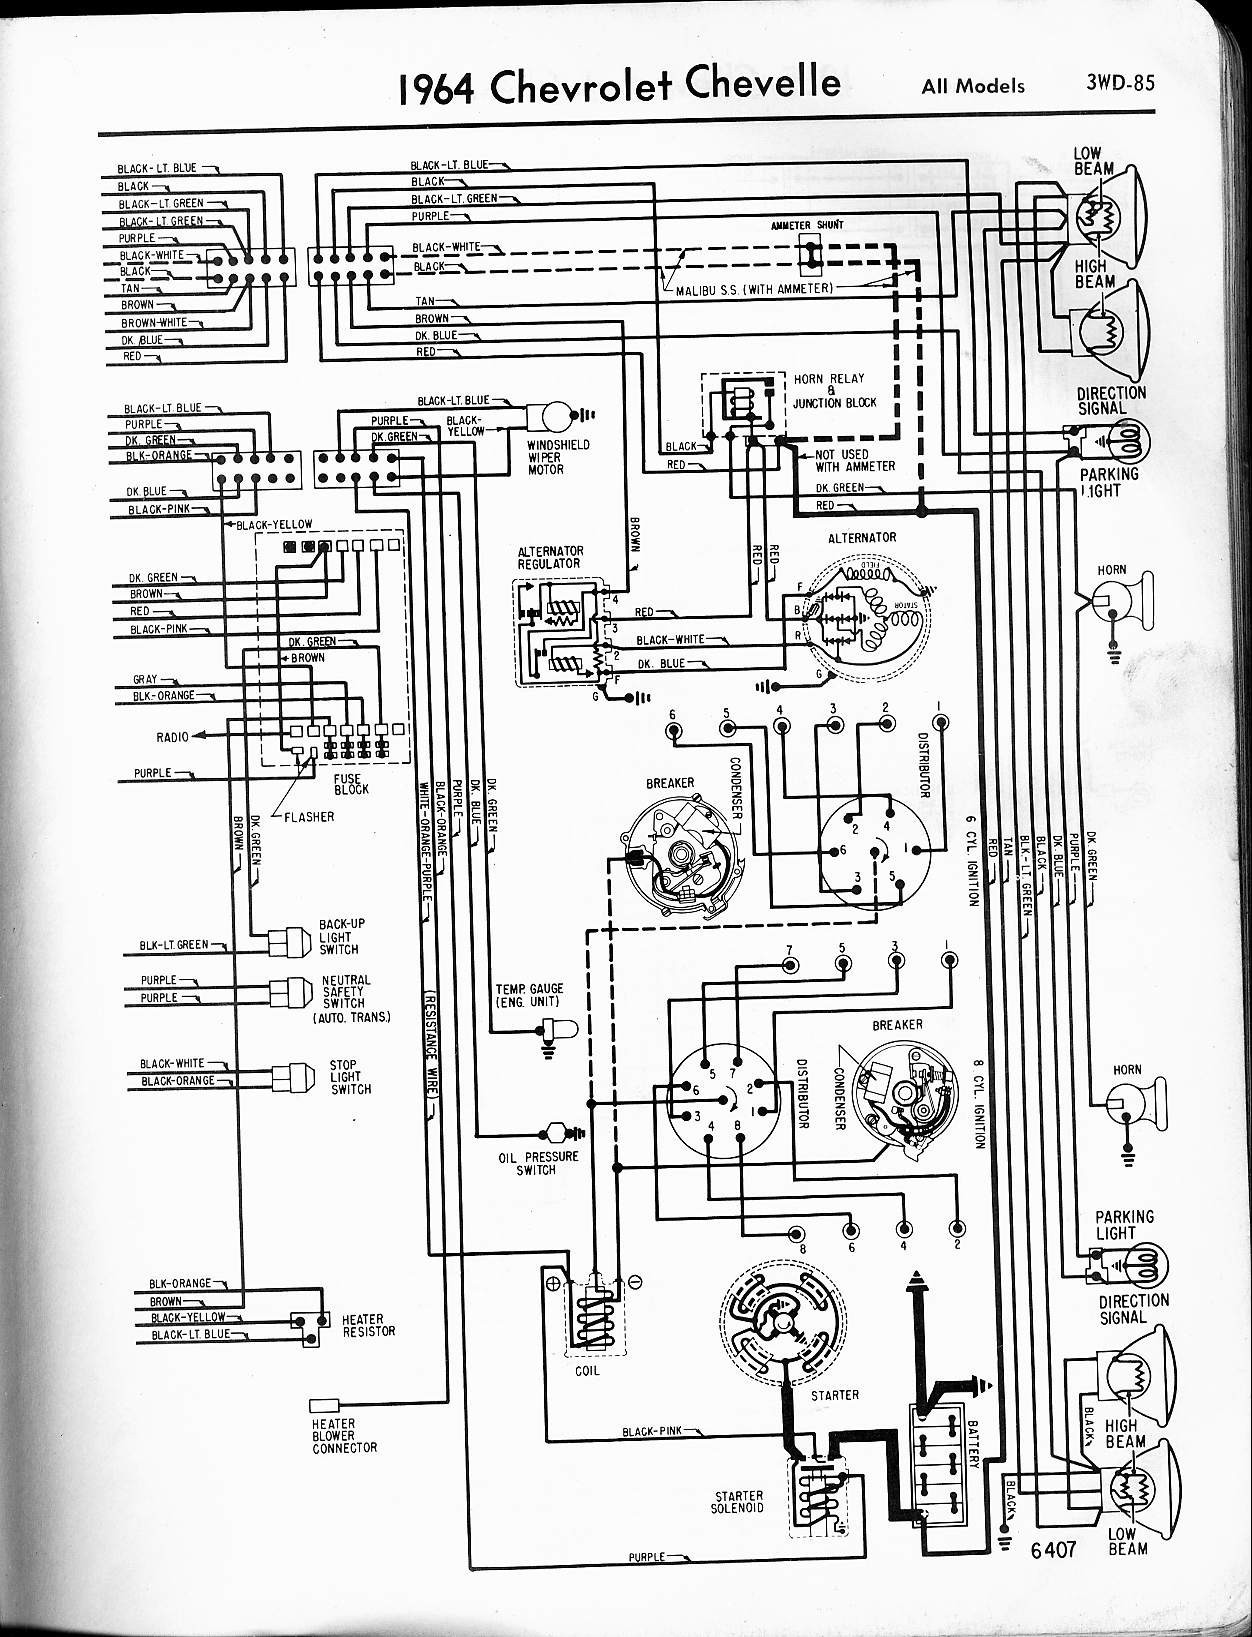 1969 Chevelle Wiring Diagram 1969 Gm Ignition Switch Wiring Another Blog About Wiring Diagram • Of 1969 Chevelle Wiring Diagram